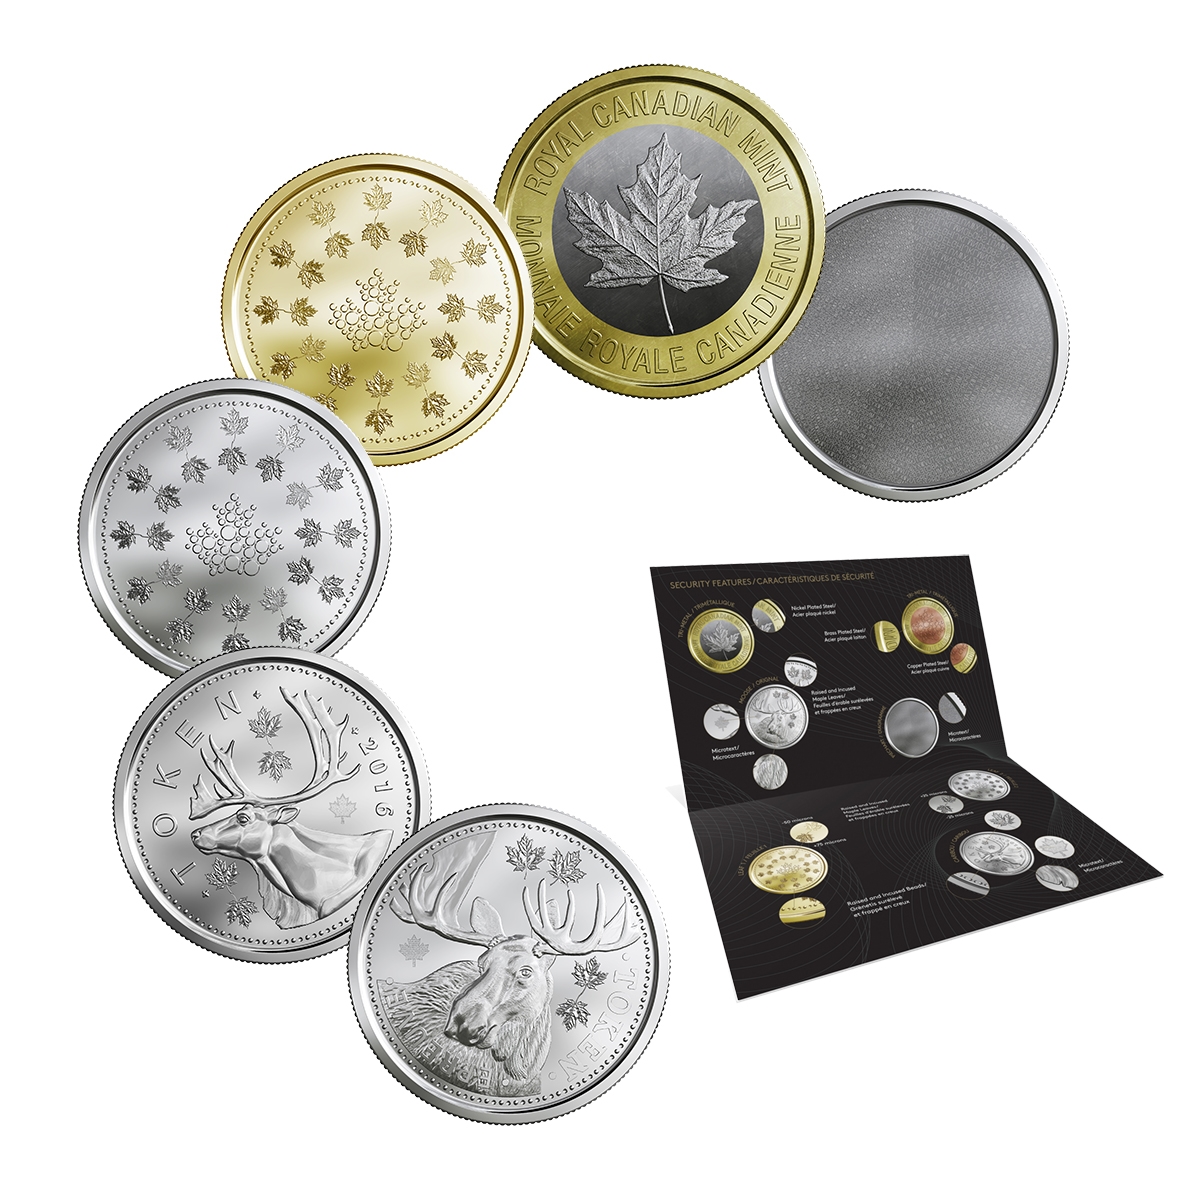 LEAF-1 Security Test Token Royal Canadian Mint 2018 Research and Development